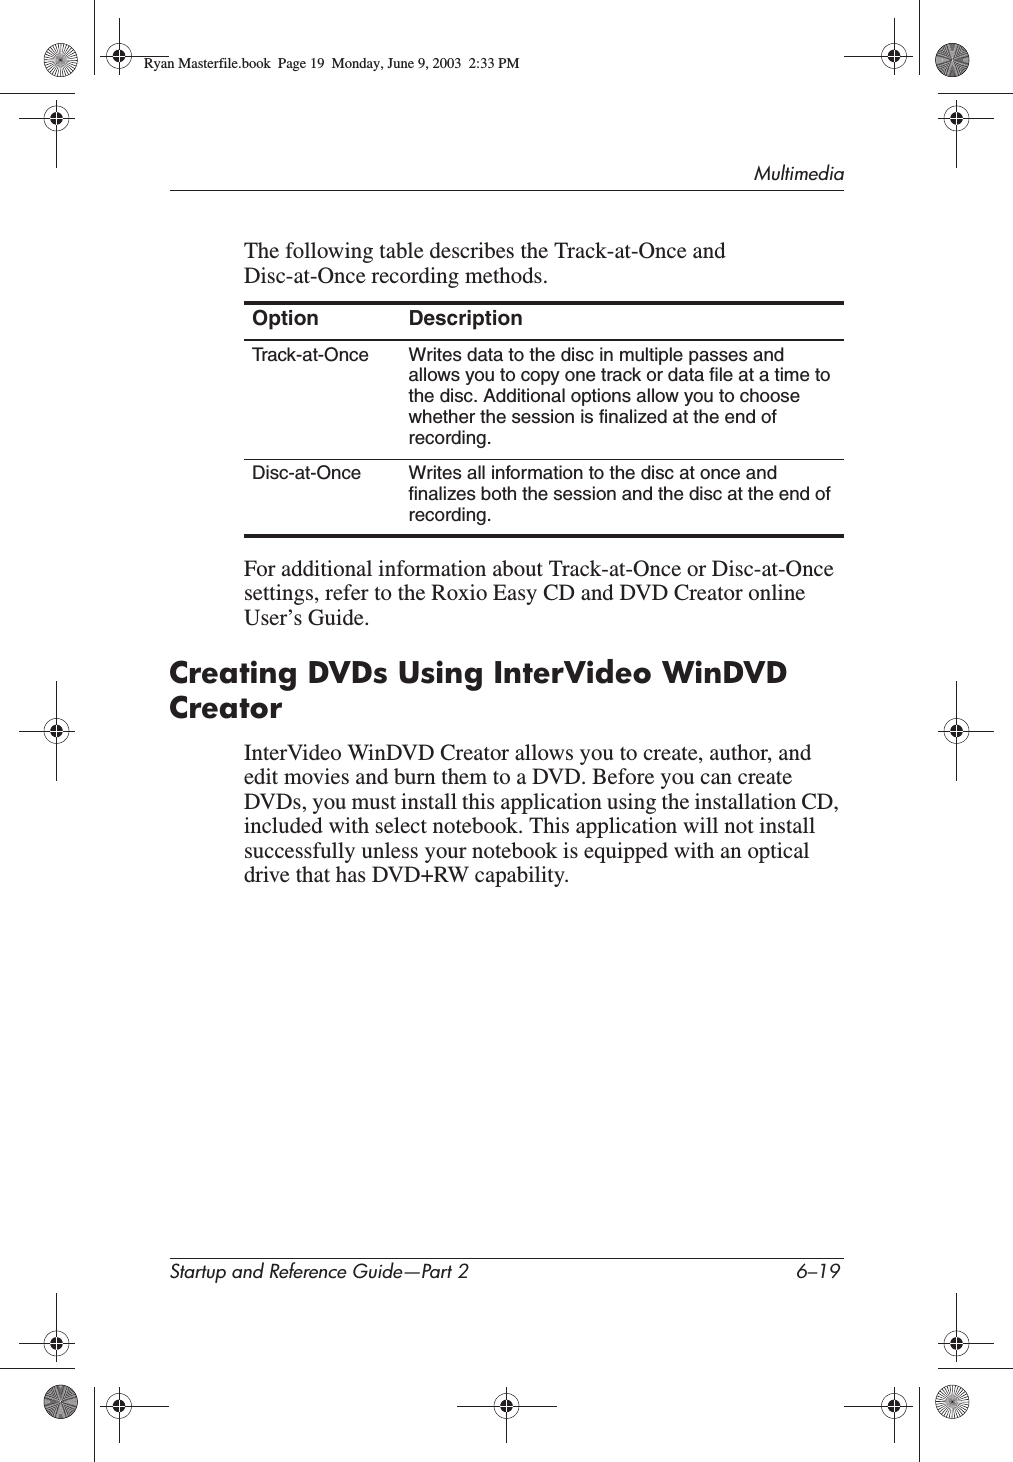 MultimediaStartup and Reference Guide—Part 2 6–19The following table describes the Track-at-Once and Disc-at-Once recording methods.For additional information about Track-at-Once or Disc-at-Once settings, refer to the Roxio Easy CD and DVD Creator online User’s Guide.Creating DVDs Using InterVideo WinDVD CreatorInterVideo WinDVD Creator allows you to create, author, and edit movies and burn them to a DVD. Before you can create DVDs, you must install this application using the installation CD, included with select notebook. This application will not install successfully unless your notebook is equipped with an optical drive that has DVD+RW capability.Option DescriptionTrack-at-Once Writes data to the disc in multiple passes and allows you to copy one track or data file at a time to the disc. Additional options allow you to choose whether the session is finalized at the end of recording.Disc-at-Once Writes all information to the disc at once and finalizes both the session and the disc at the end of recording.Ryan Masterfile.book  Page 19  Monday, June 9, 2003  2:33 PM